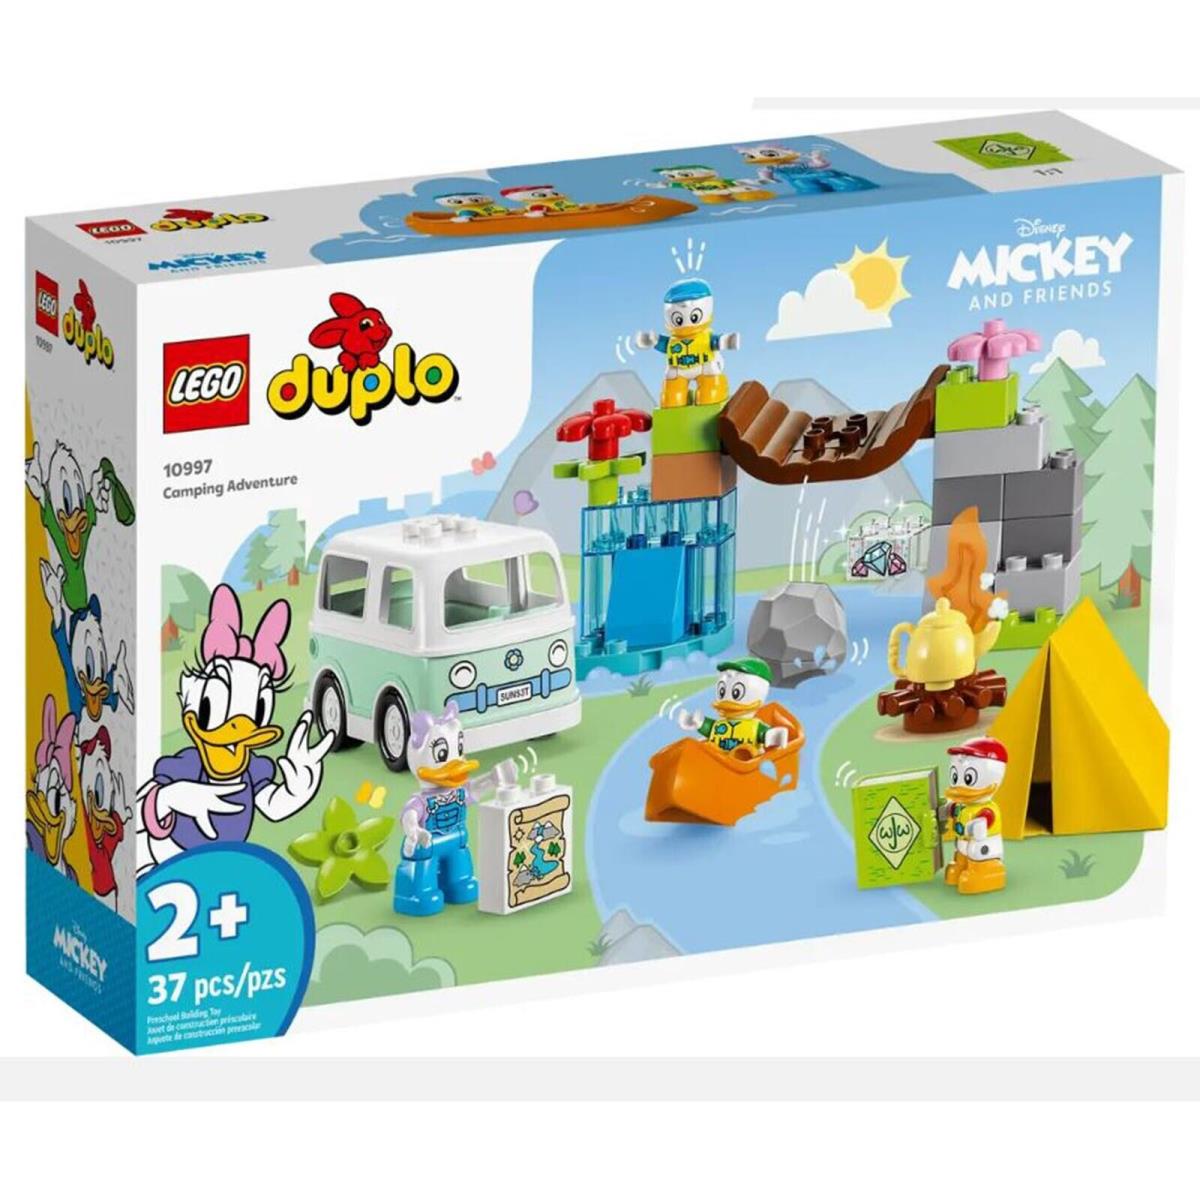 Lego Duplo Disney Mickey and Friends Camping Adventure Building Set 10997